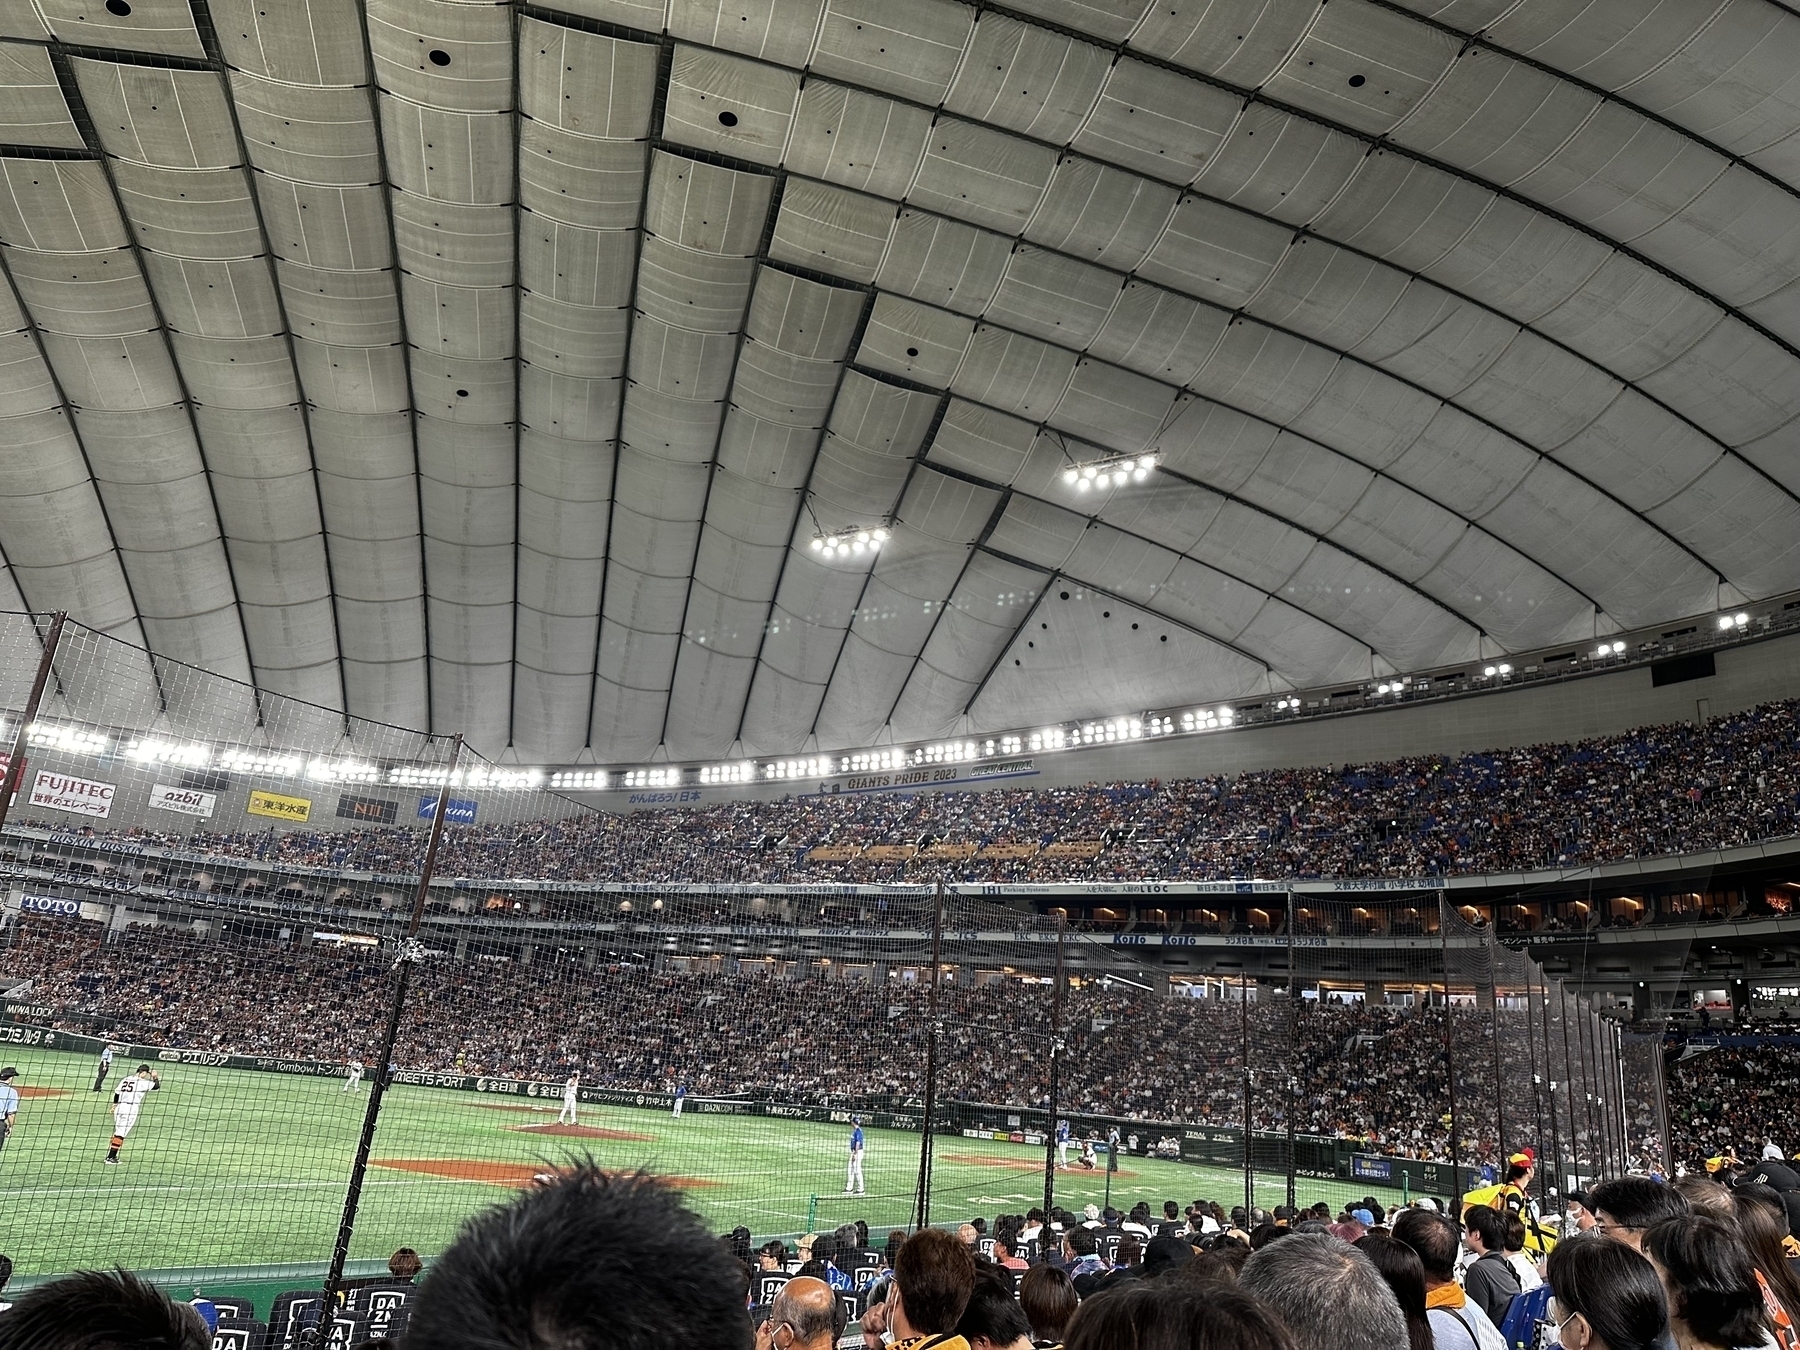 Tokyo dome infield during baseball game